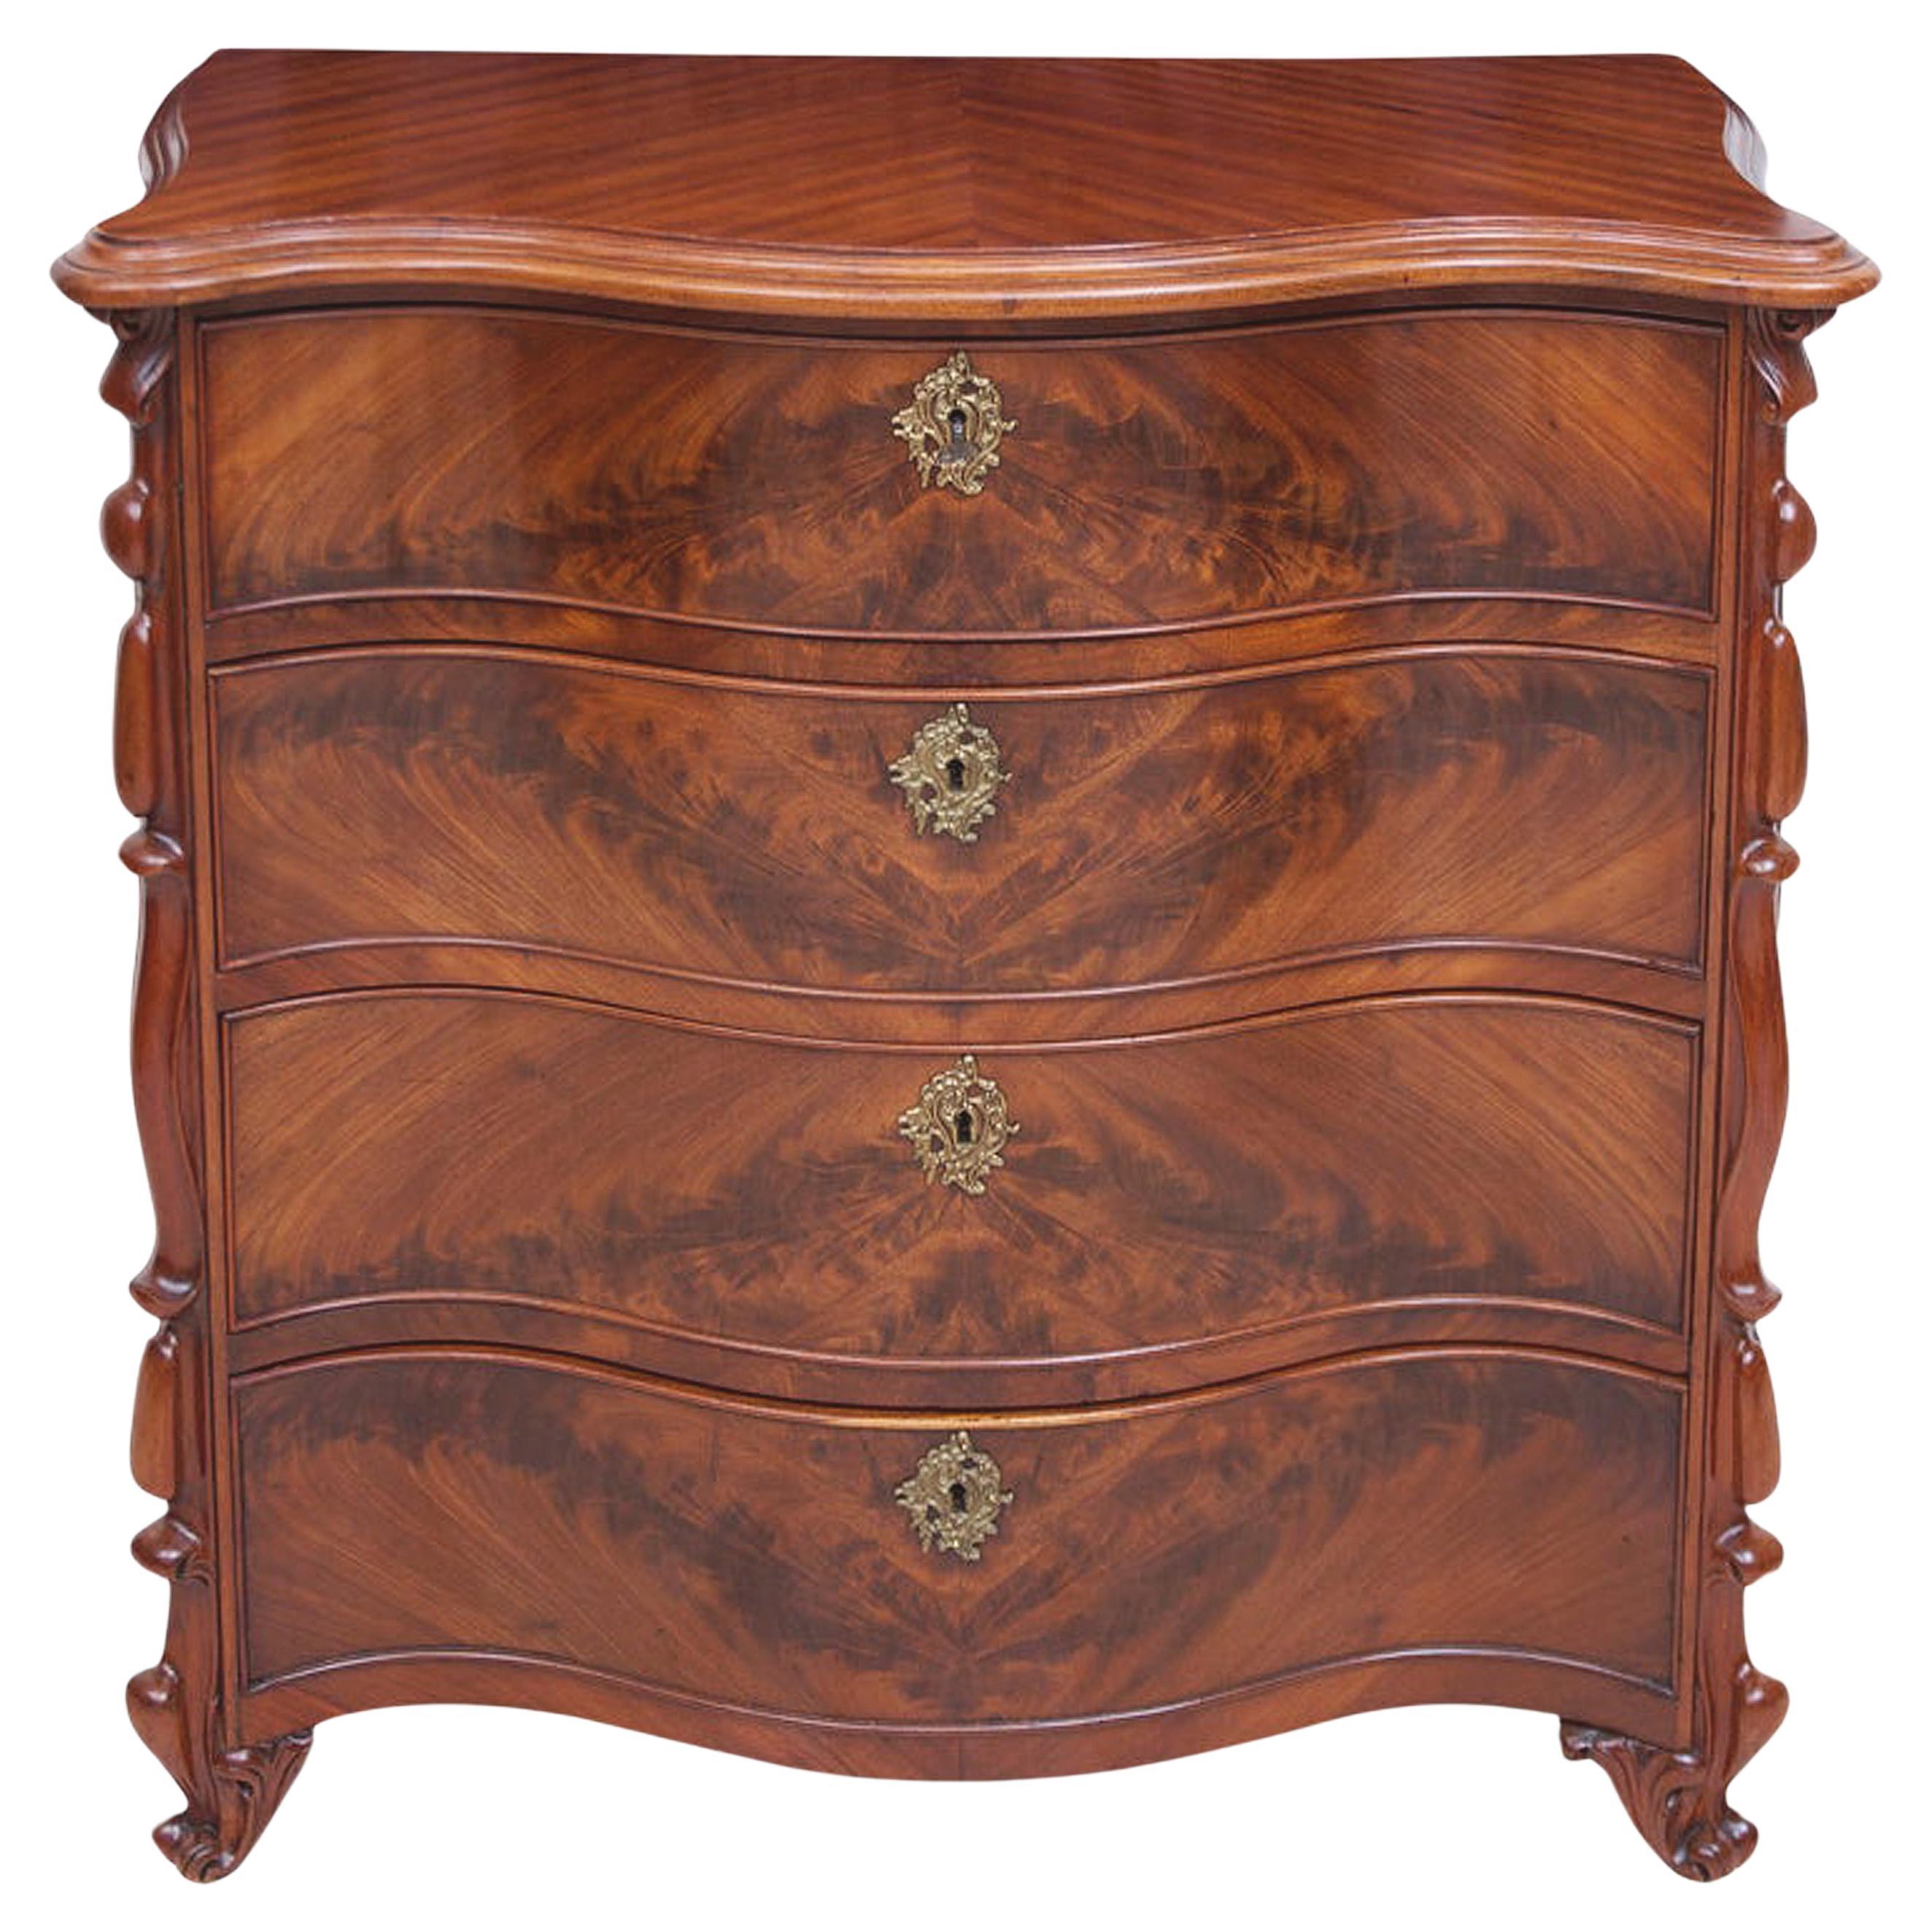 A Fine chest with four drawers in bookmatched, crotch West Indies mahogany with serpentine front and resting on carved slipper feet. Features a serpentine top in quarter-sawn sapele (African mahogany) with mahogany sliding drawer covers inside top